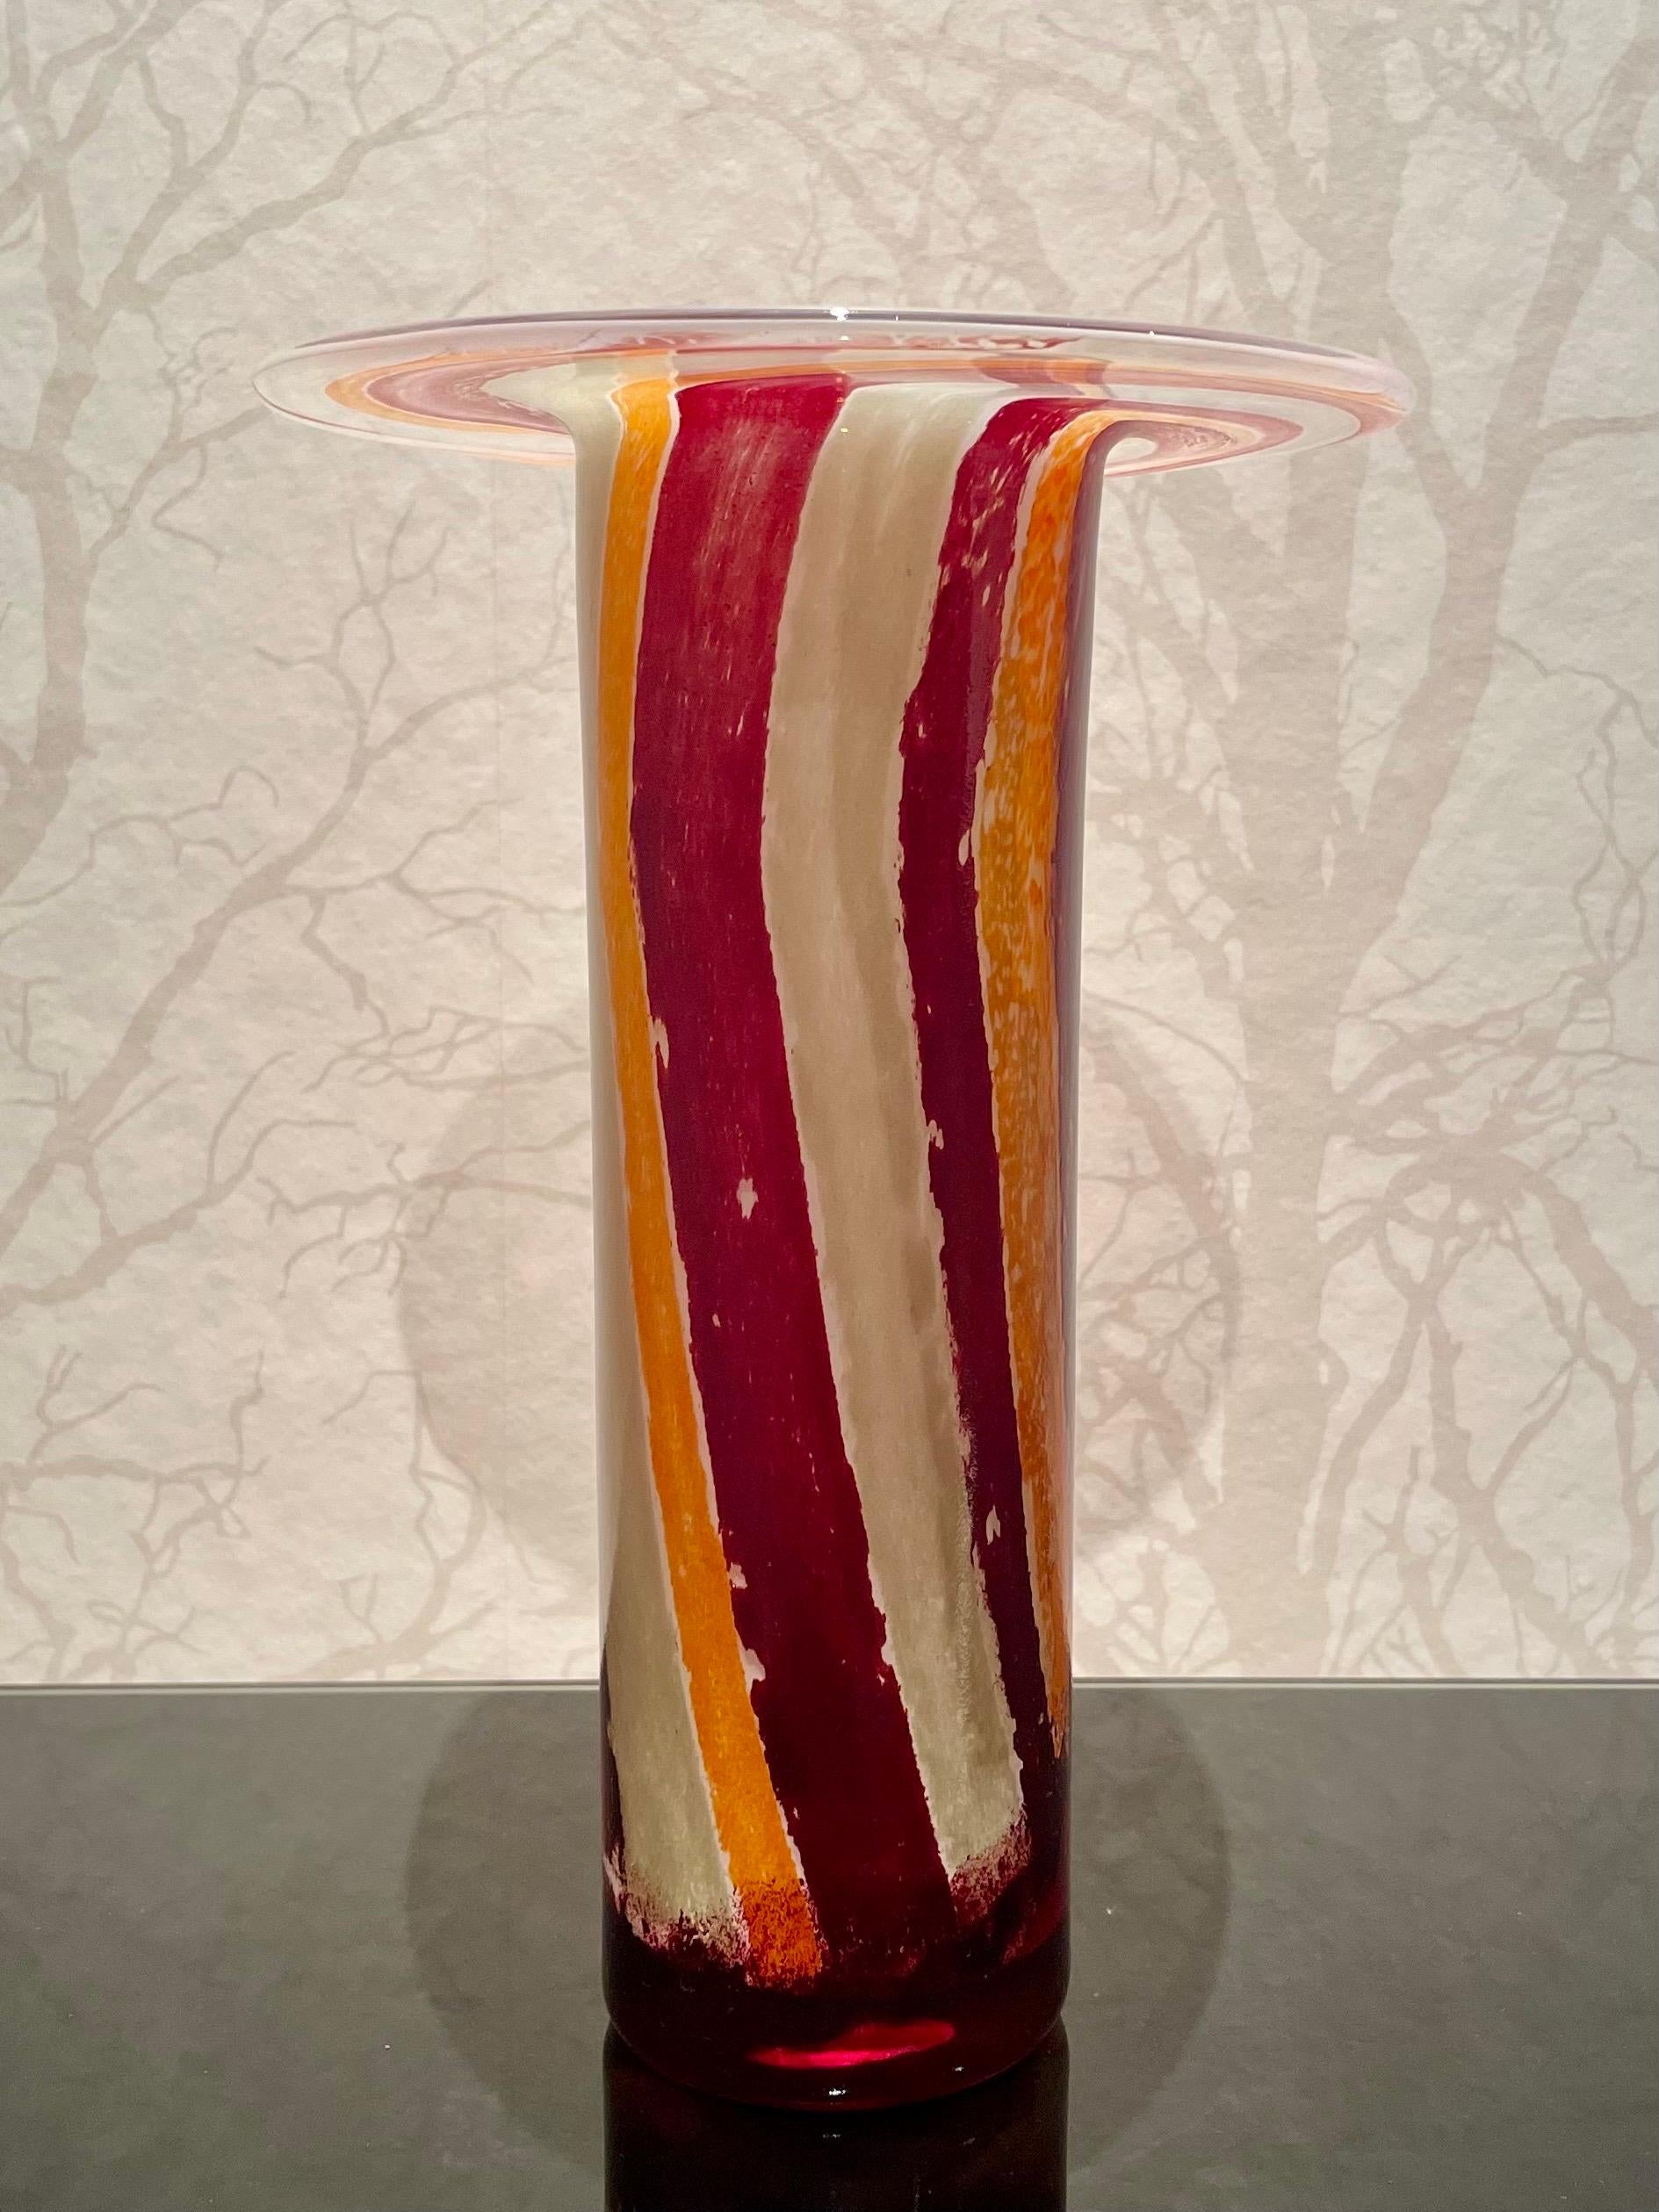 This is a colorful, sculptural glass vase by the Swedish glass artist Kjell Engman.
It comes in a tall cylinder shape.
It has a thick trunk and a thin, flat and very wide top like a brim of a hat. The pattern consists of vertical, slightly twisted